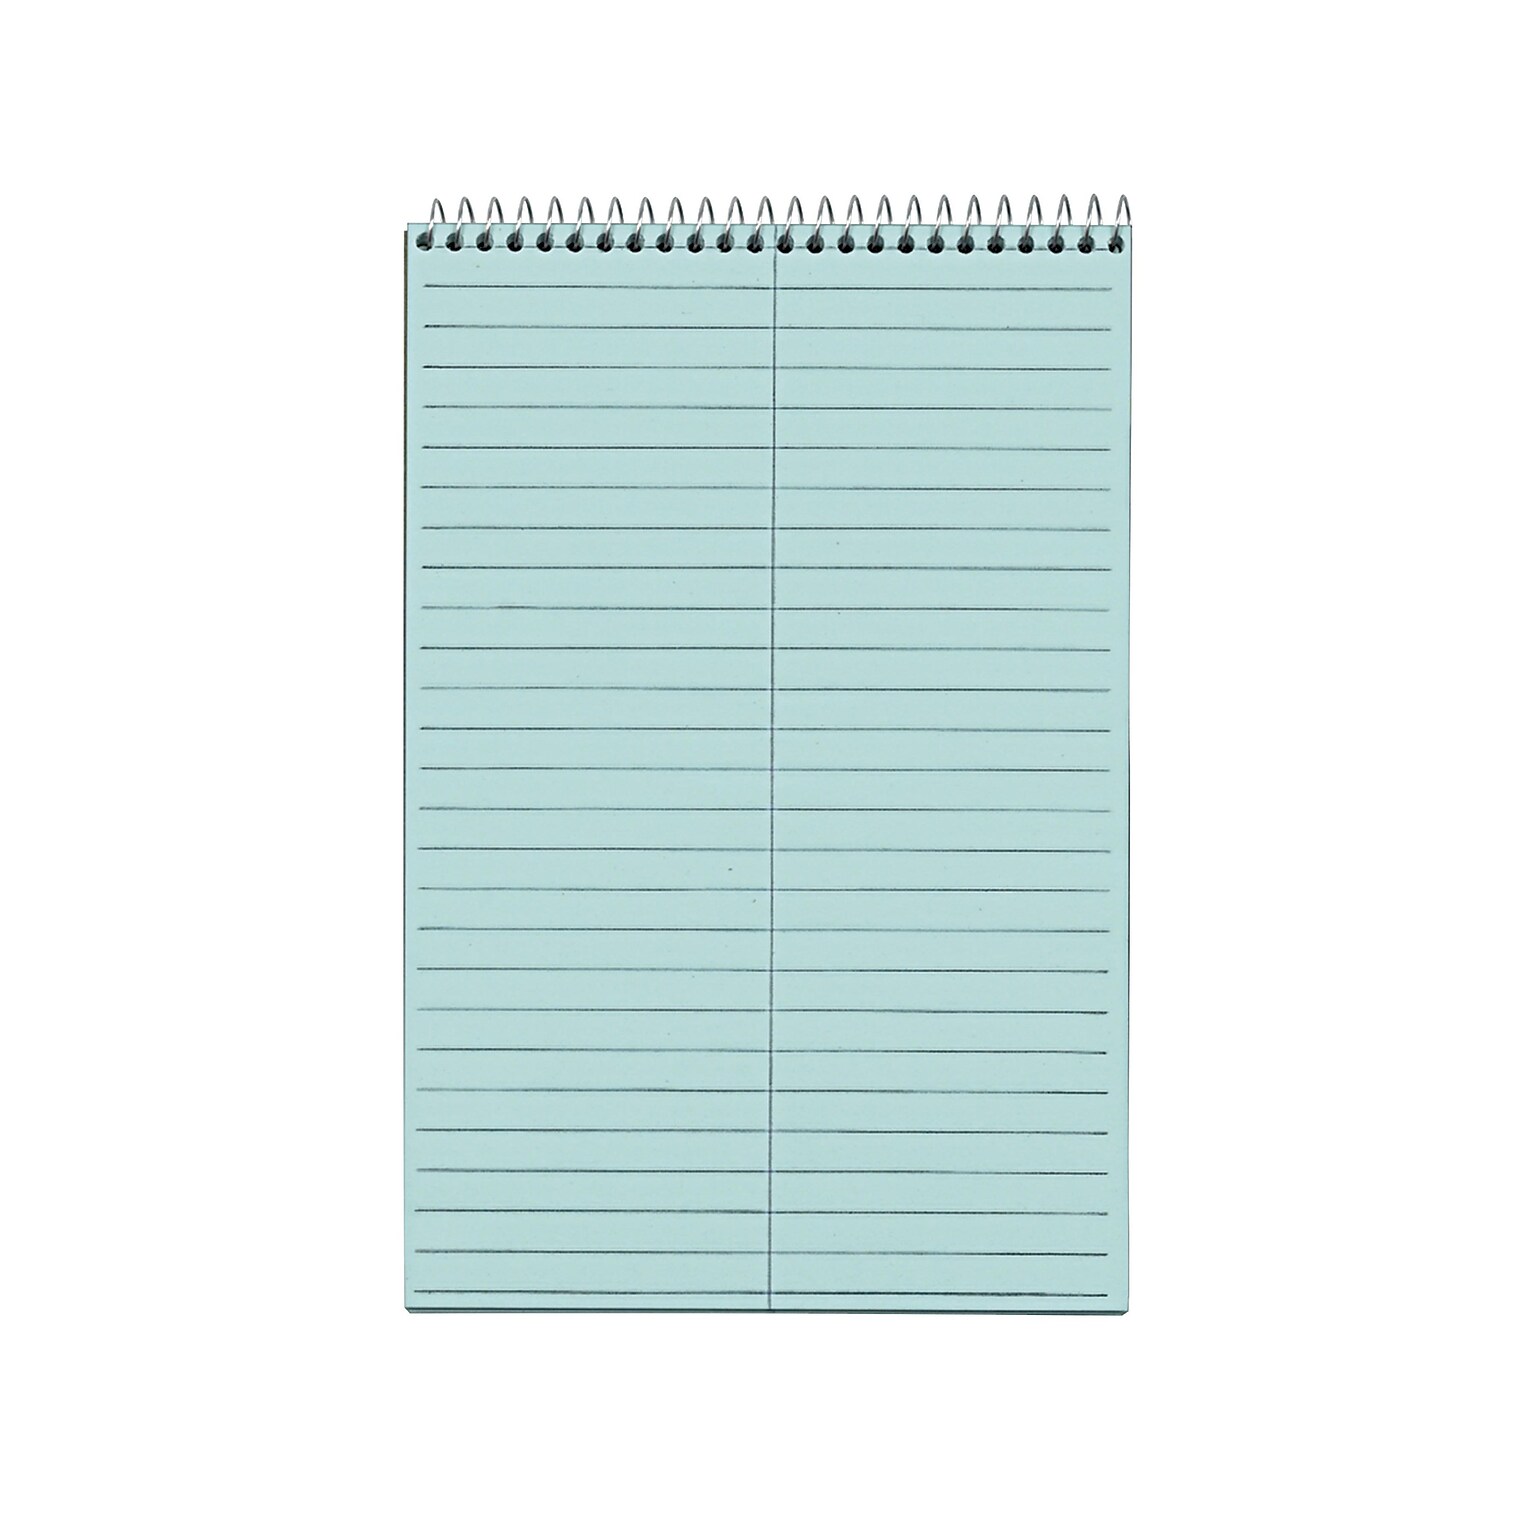 TOPS Prism Steno Pads, 6 x 9, Gregg, Blue, 80 Sheets/Pad, 4 Pads/Pack (TOP 80284)